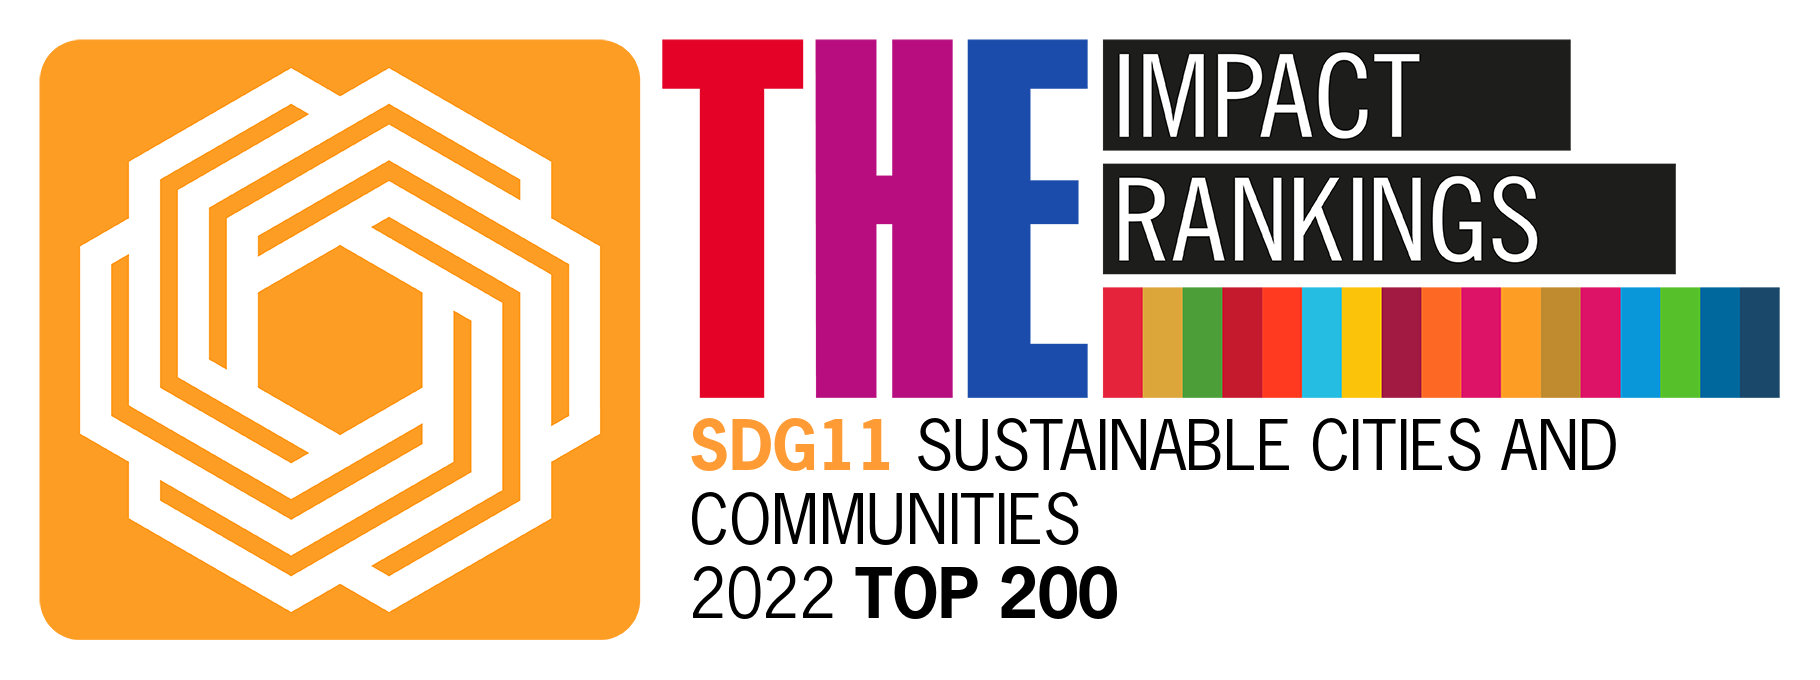 SDG11_ Sustainable Cities and Communities - Top 200